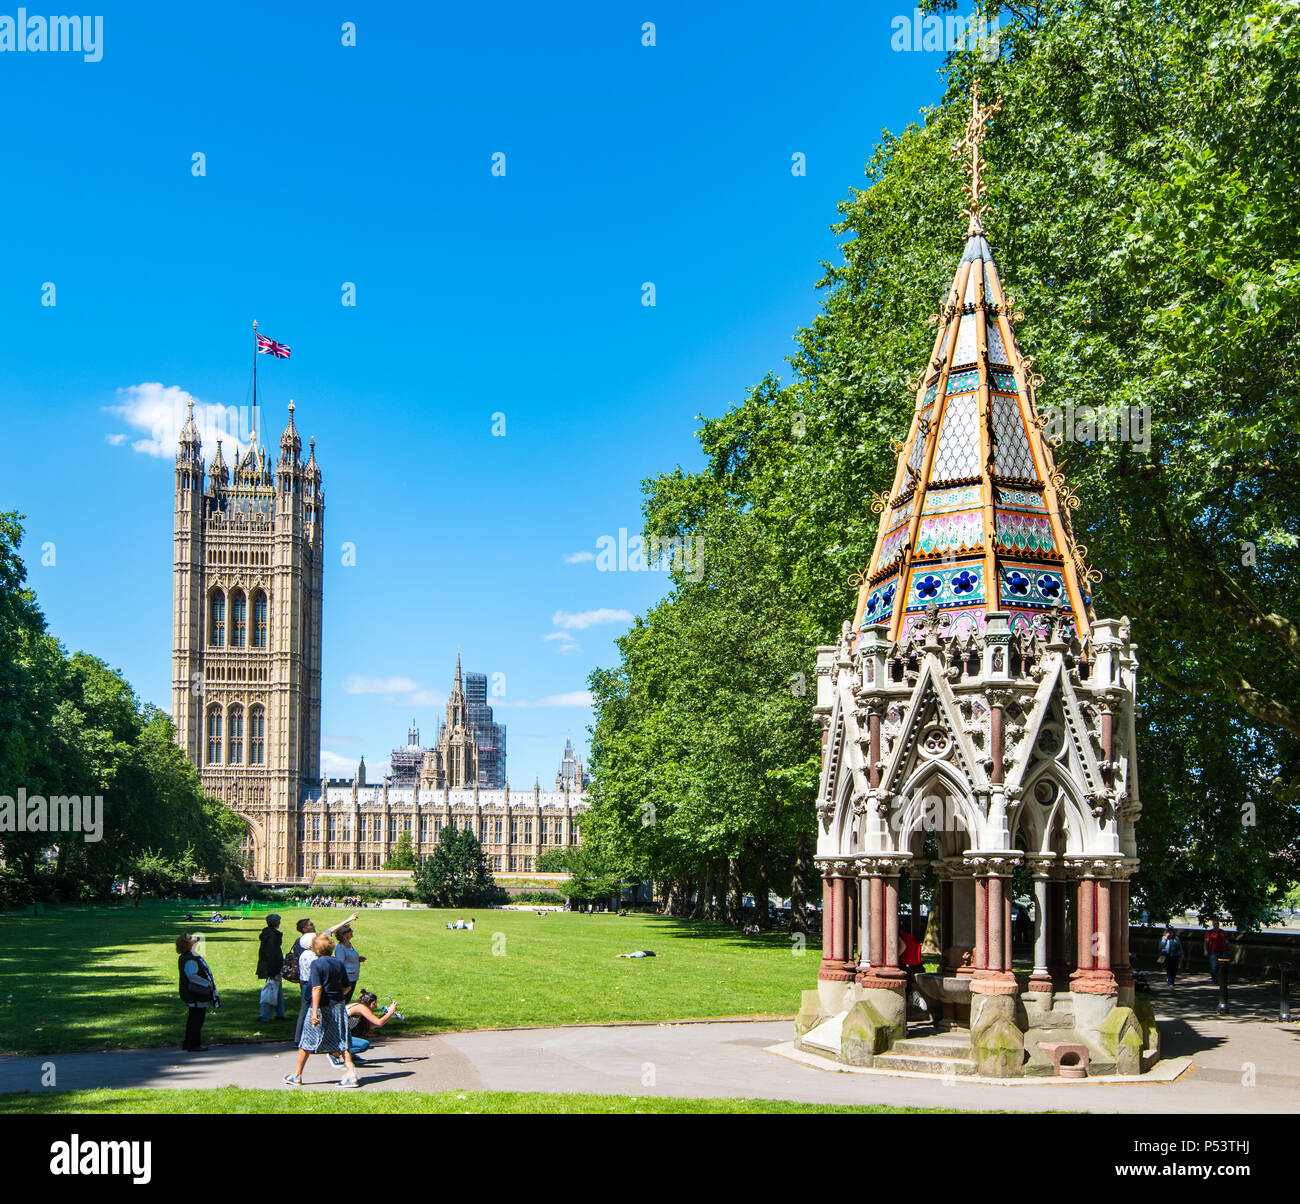 LONDON, UK - 18JUN2018: The Buxton Memorial Fountain is a monument commemorating the emancipation of slaves and is located in Victoria Tower Gardens,  Stock Photo